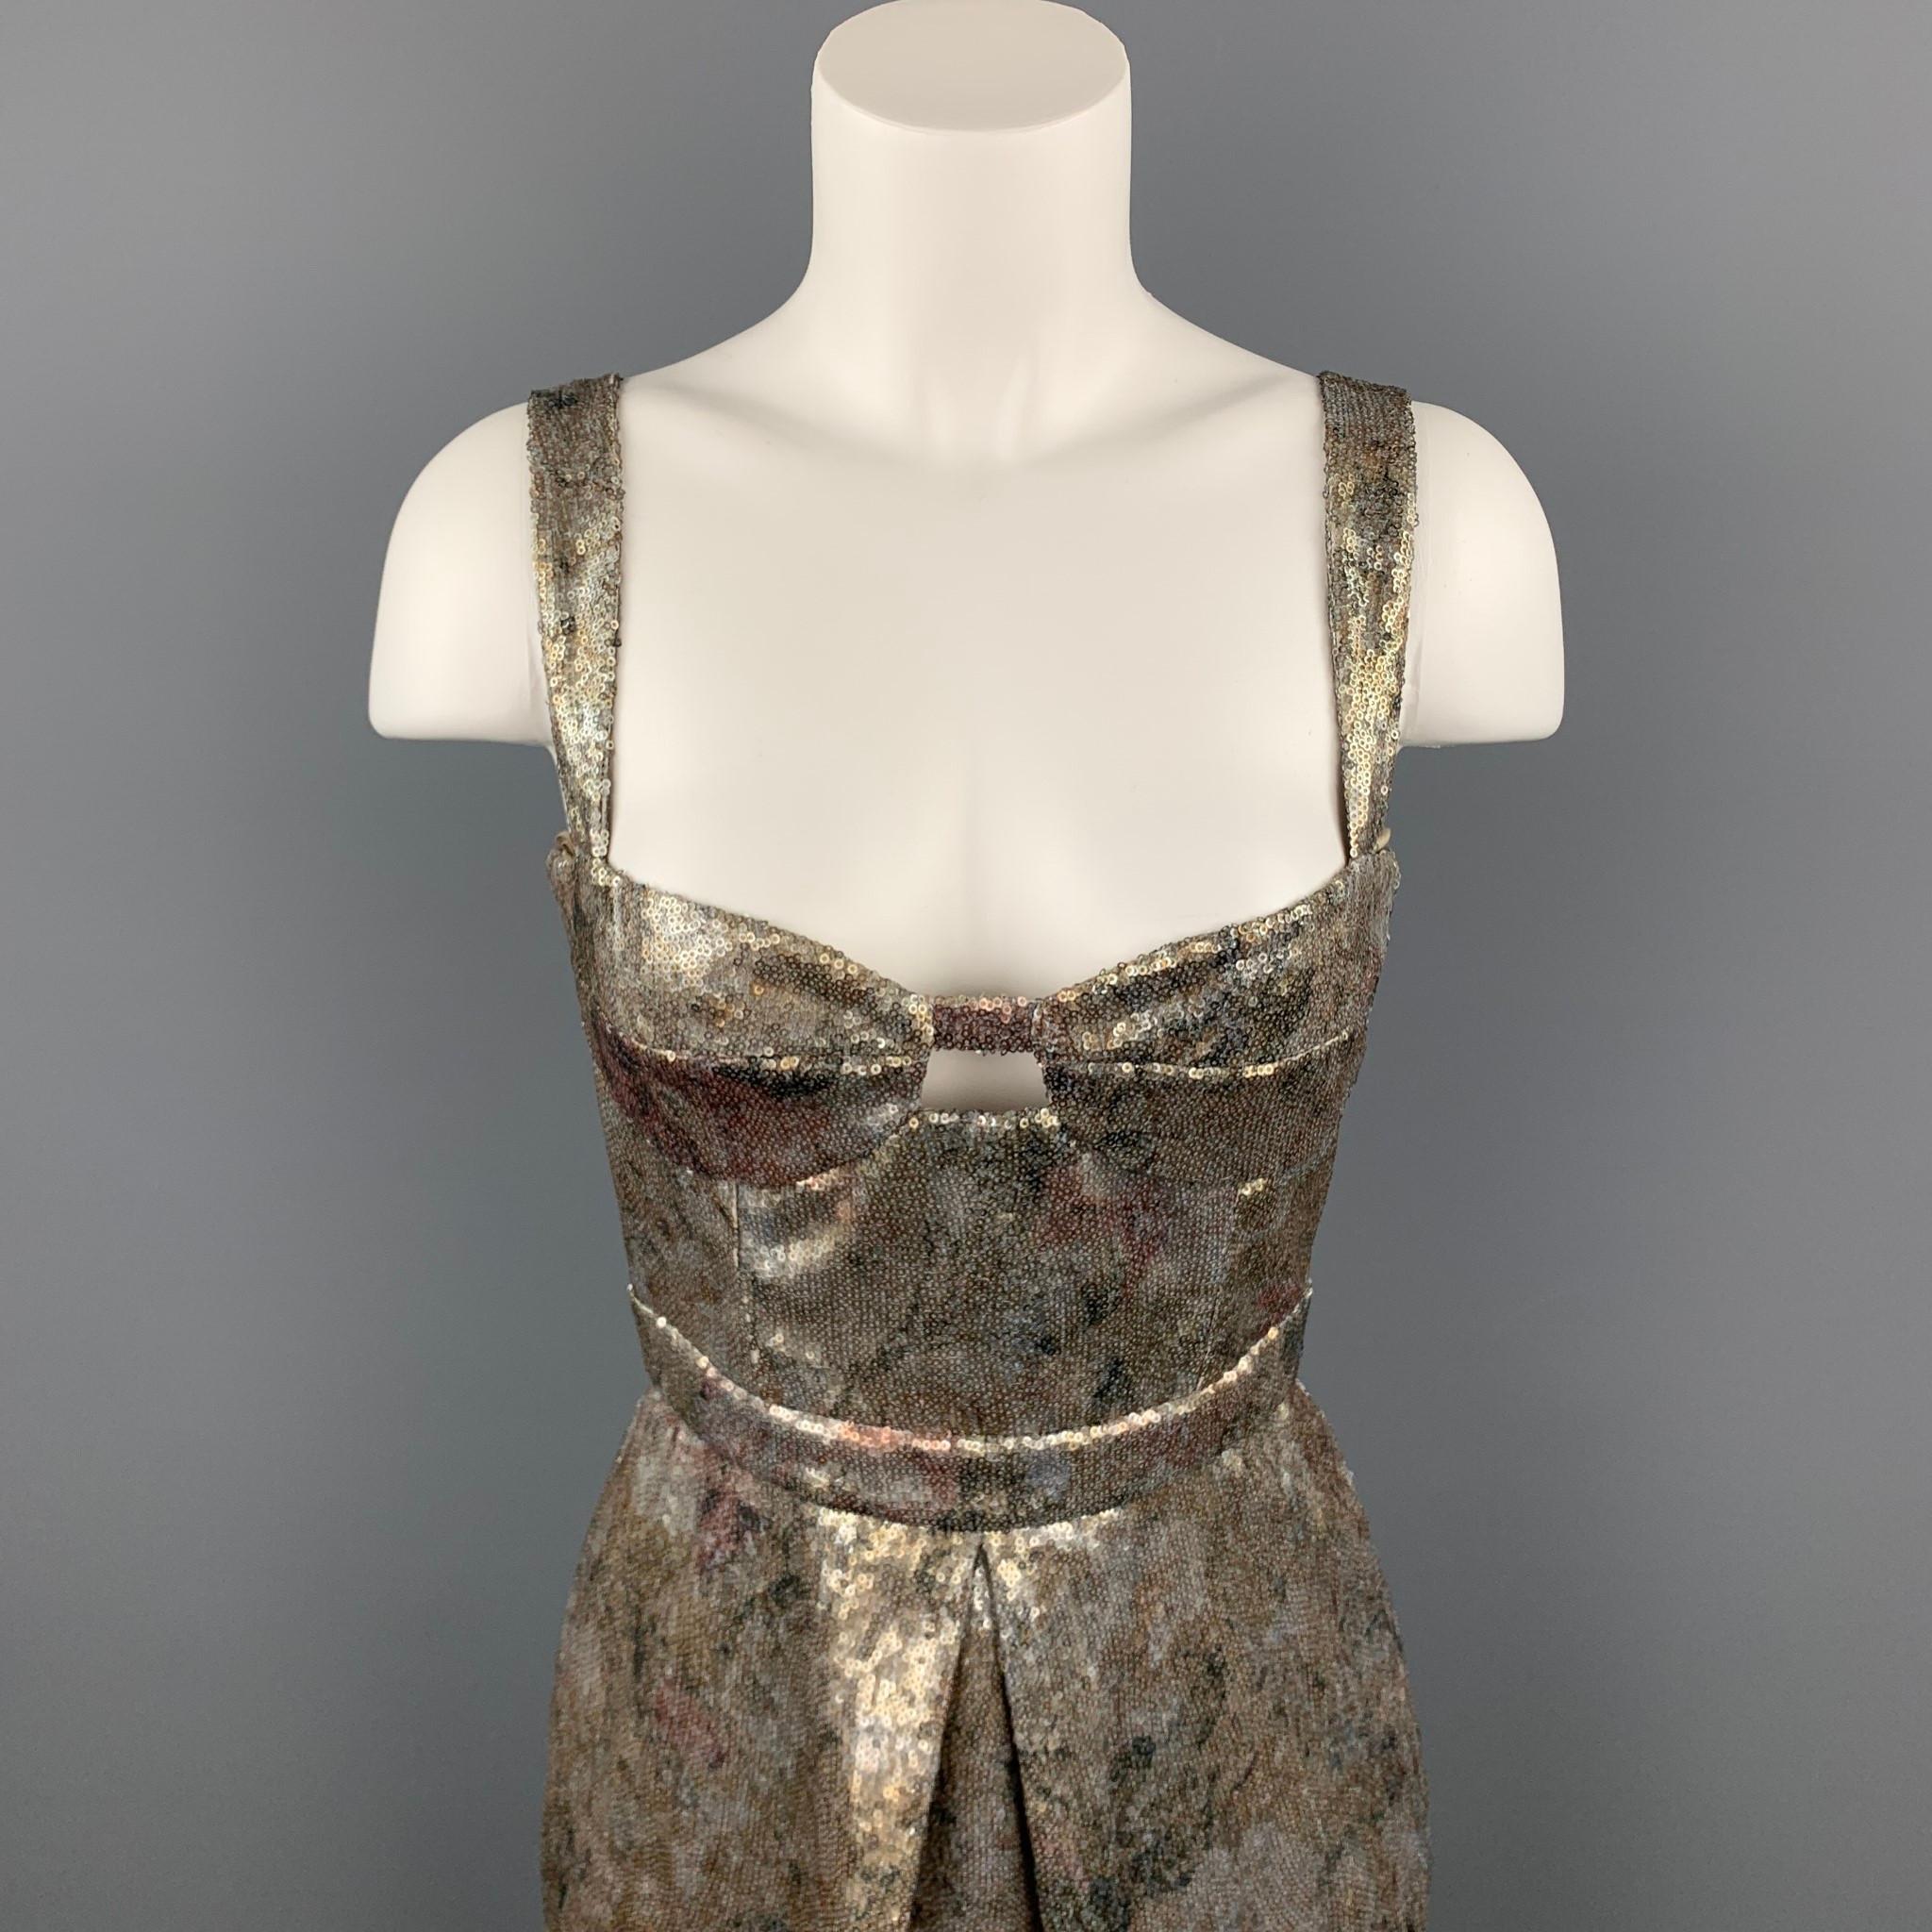 BURBERRY PRORSUM dress comes in a gold sequined polyester with a silk liner featuring a sheath style, pleated, and a back zip up closure. Made in Italy.

Very Good Pre-Owned Condition.
Marked: IT 40

Measurements:

Bust: 30 in. 
Waist: 26 in. 
Hip: